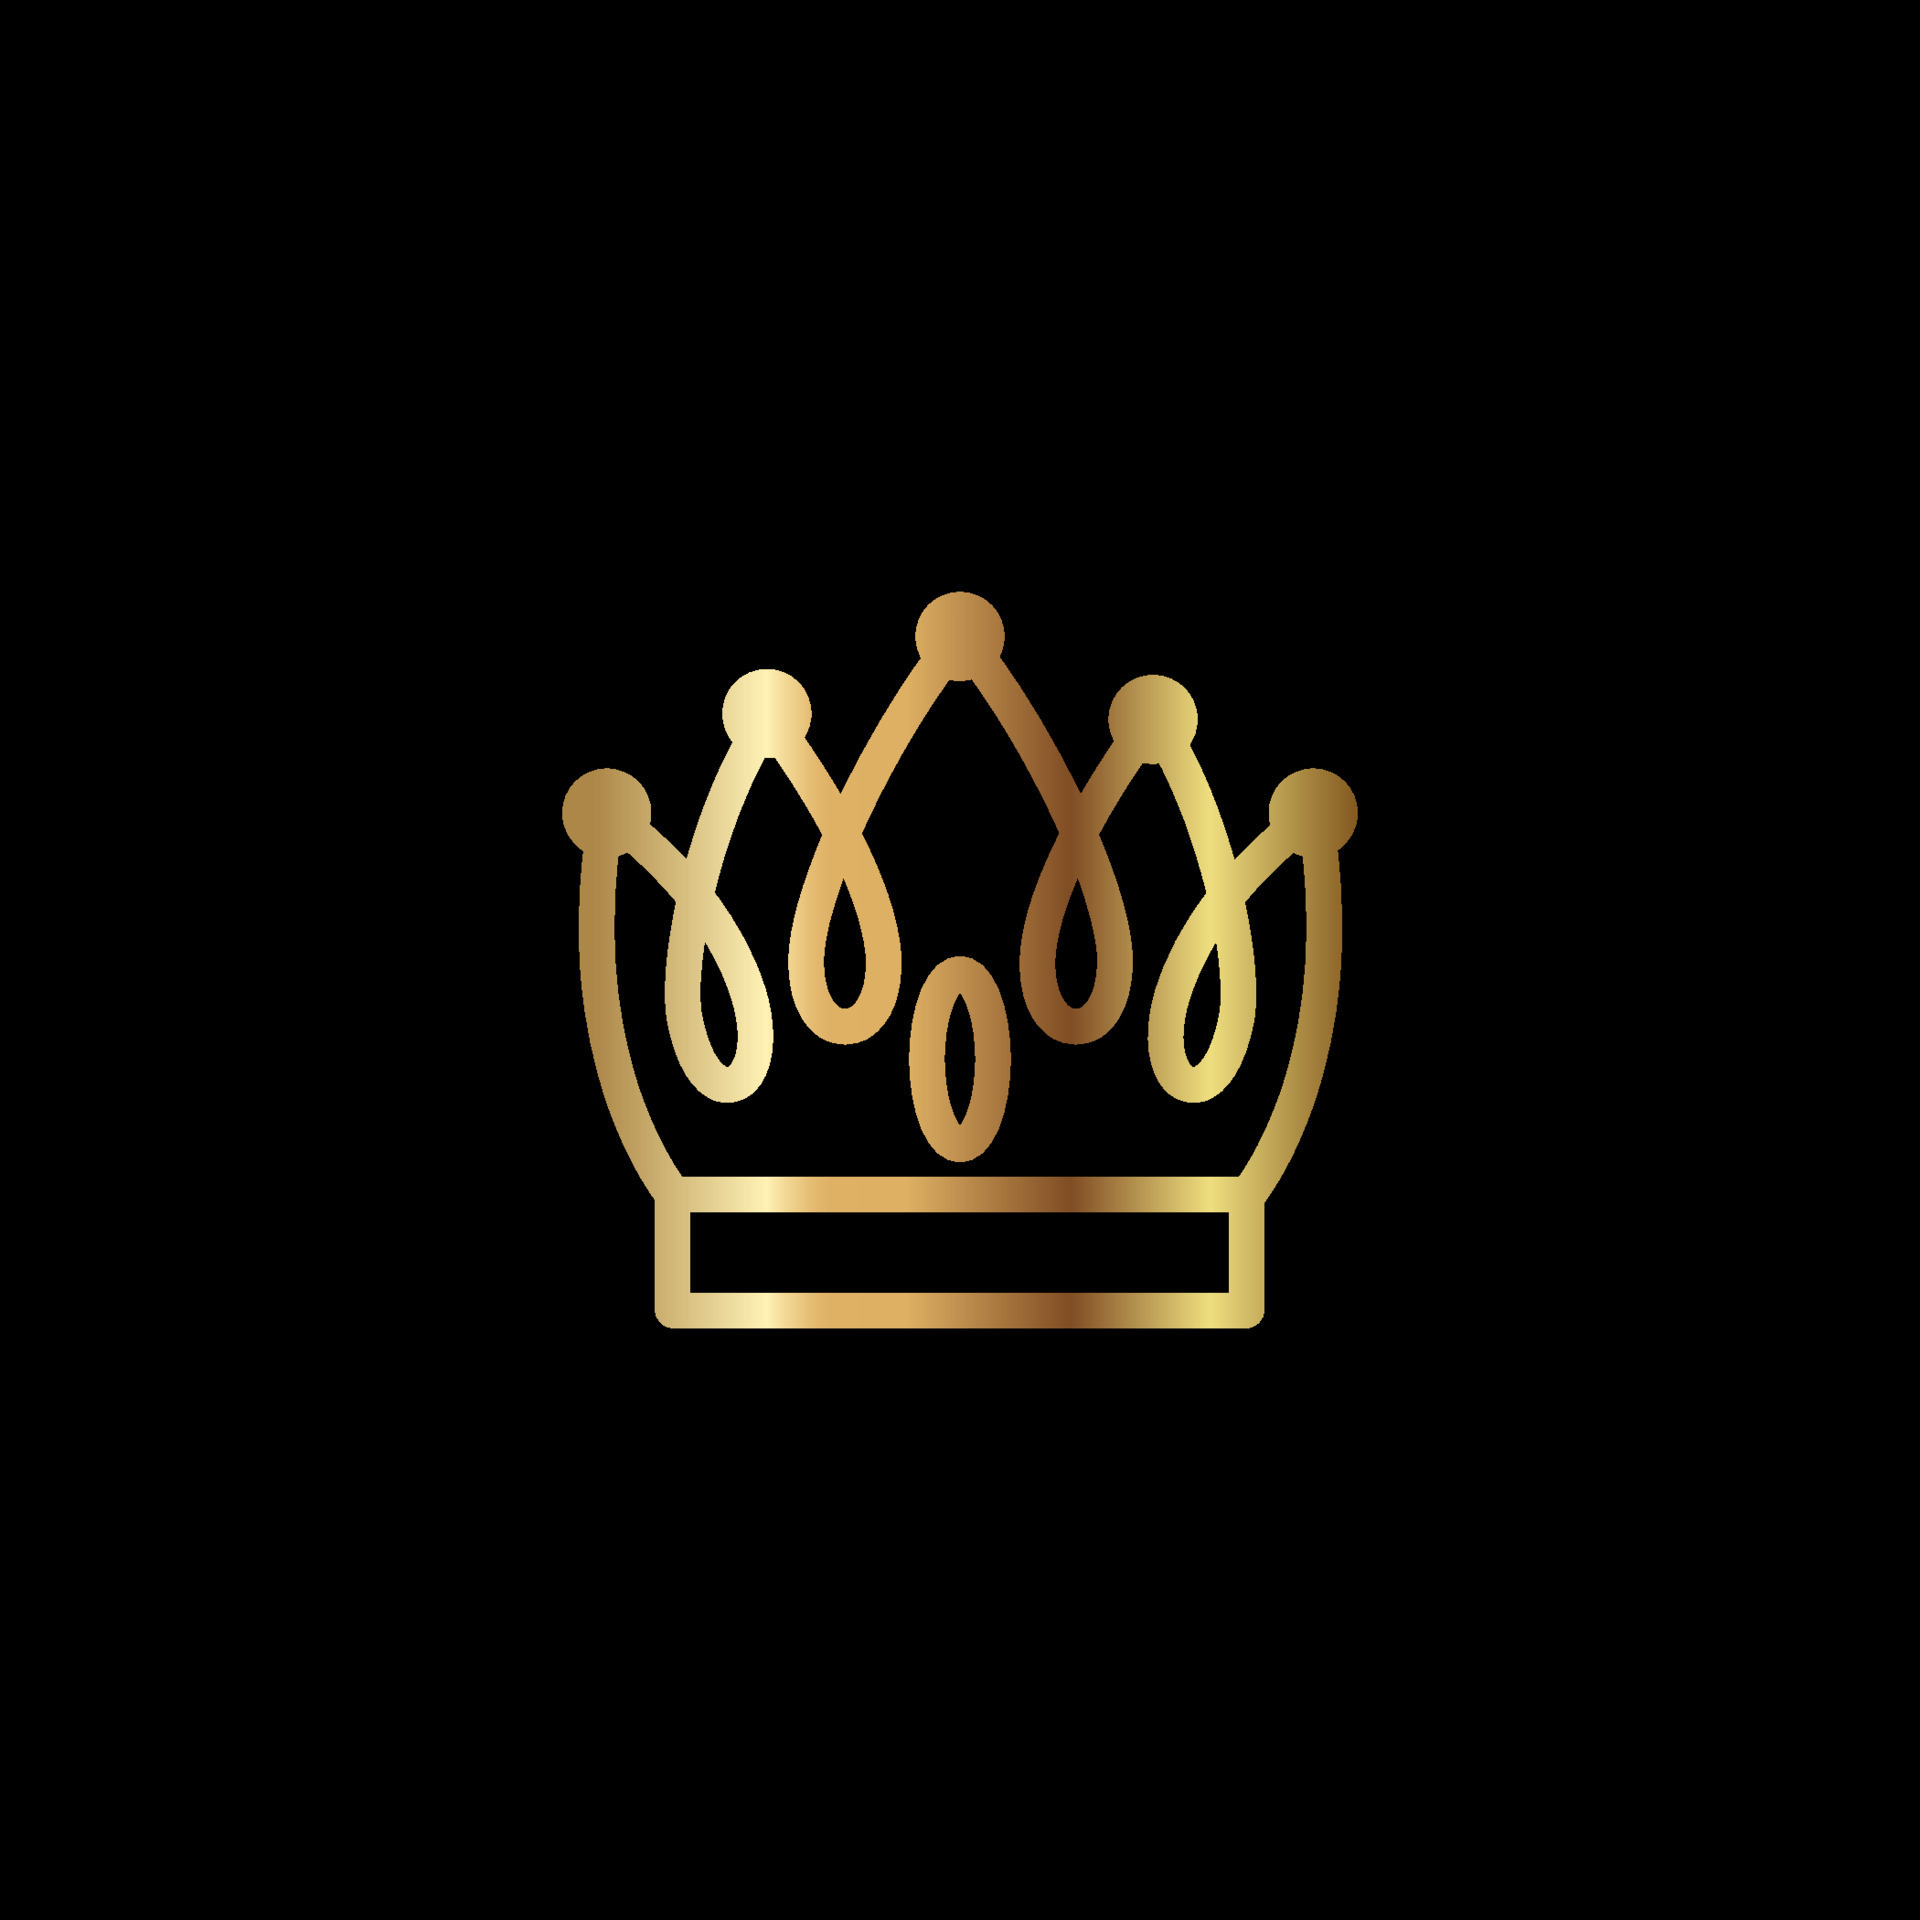 Crown icon. Crown vector illustration with golden color isolated on black  background, suitable for icon, logo, or any design element using crown  shape 7372579 Vector Art at Vecteezy